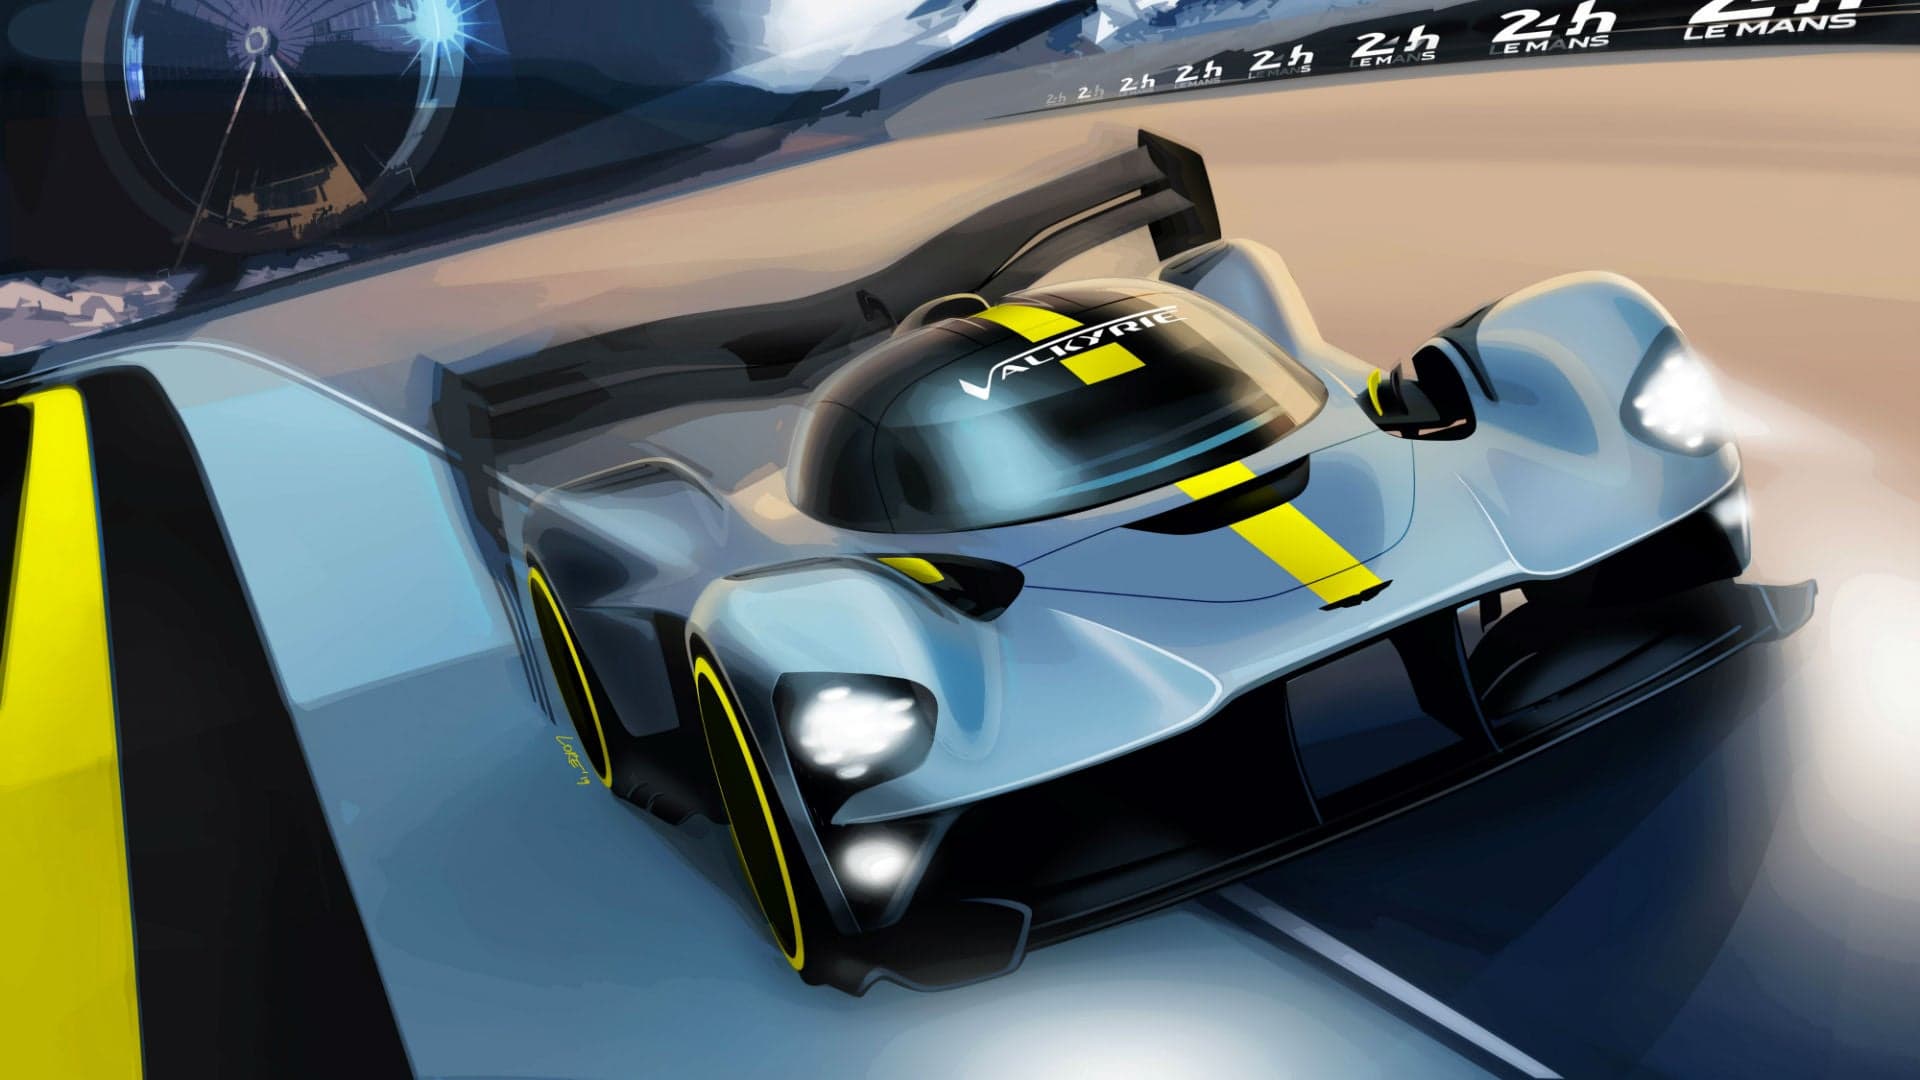 Aston Martin Valkyrie Hypercar Will Race at Next Year’s 24 Hours of Le Mans for the Overall Win